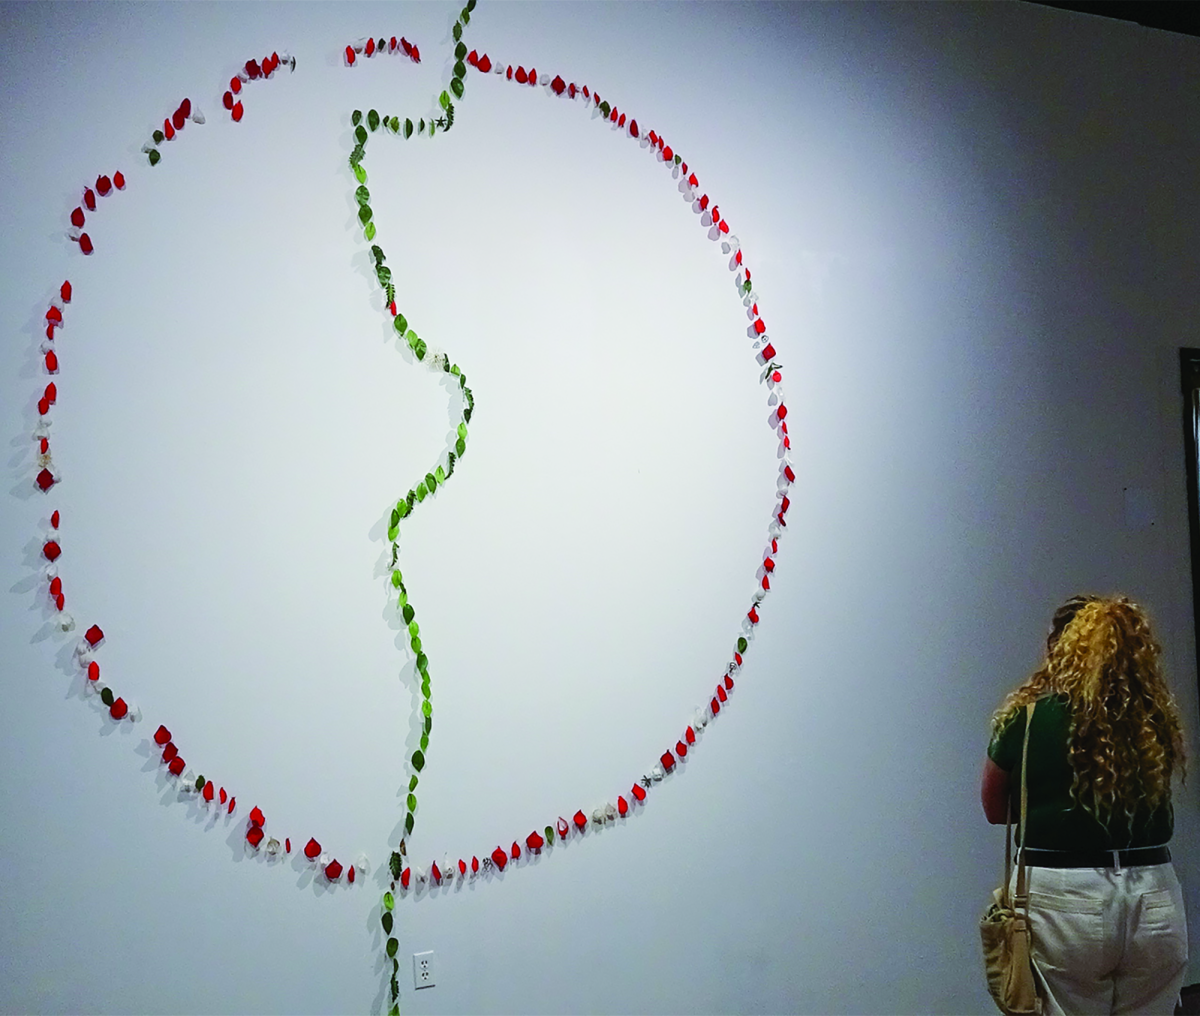 Journalism sophomore Breanna Lopez looks at a large-scale installation of plastic cemetery flowers on the wall, Wednesday, Sept. 20, 2023, at the The Unsettlements: Moms exhibition at Texas State Galleries.